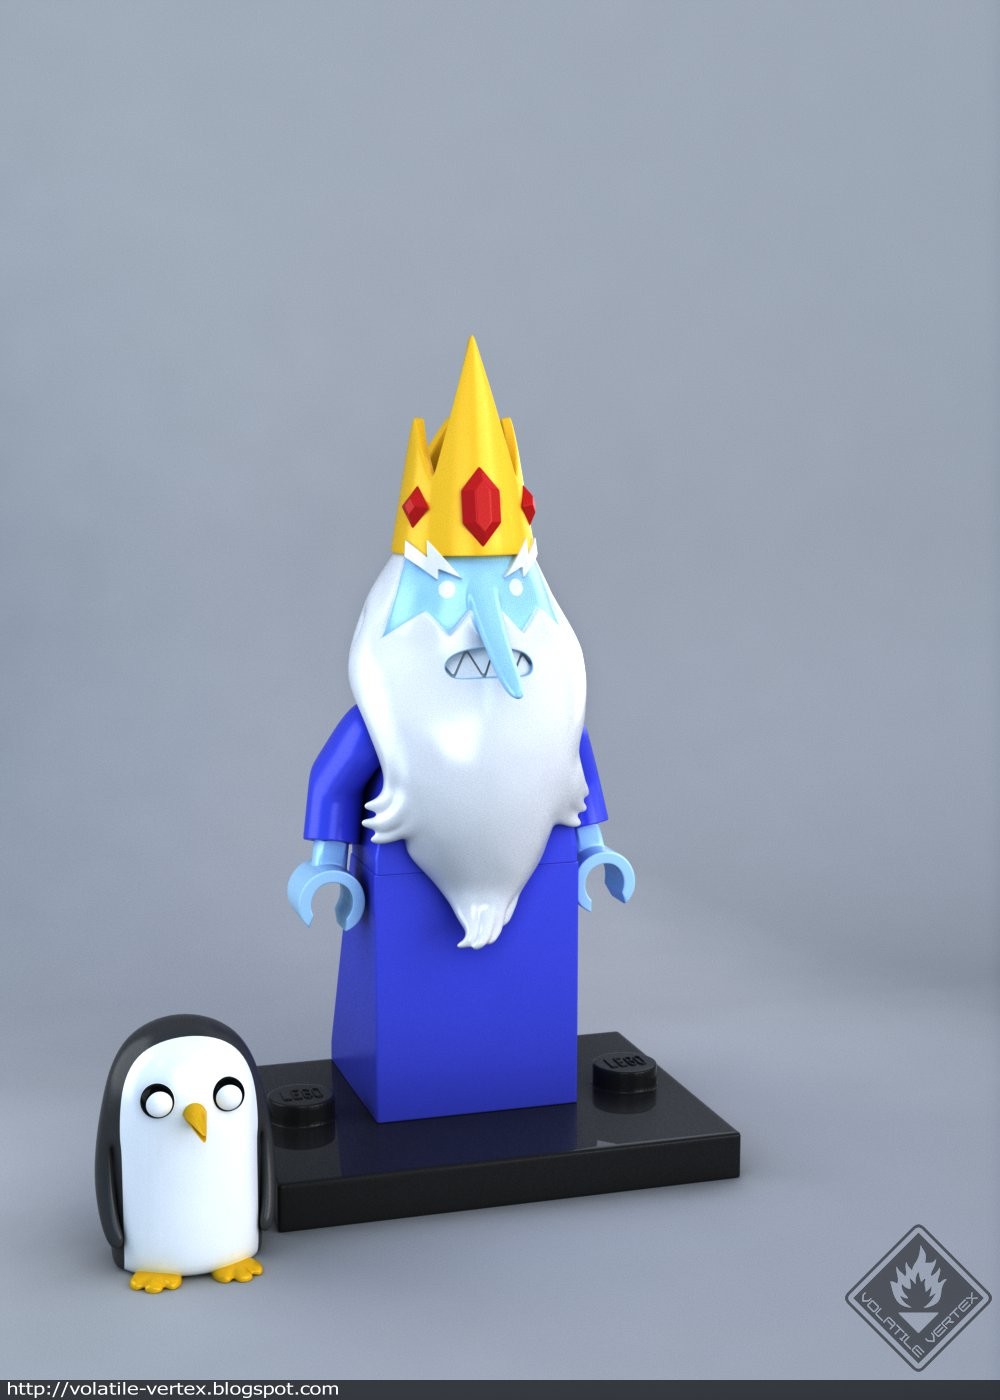 Details about   Lego Ice King Minifigure with Transparent Snowflake Store Exclusive Winter 2019